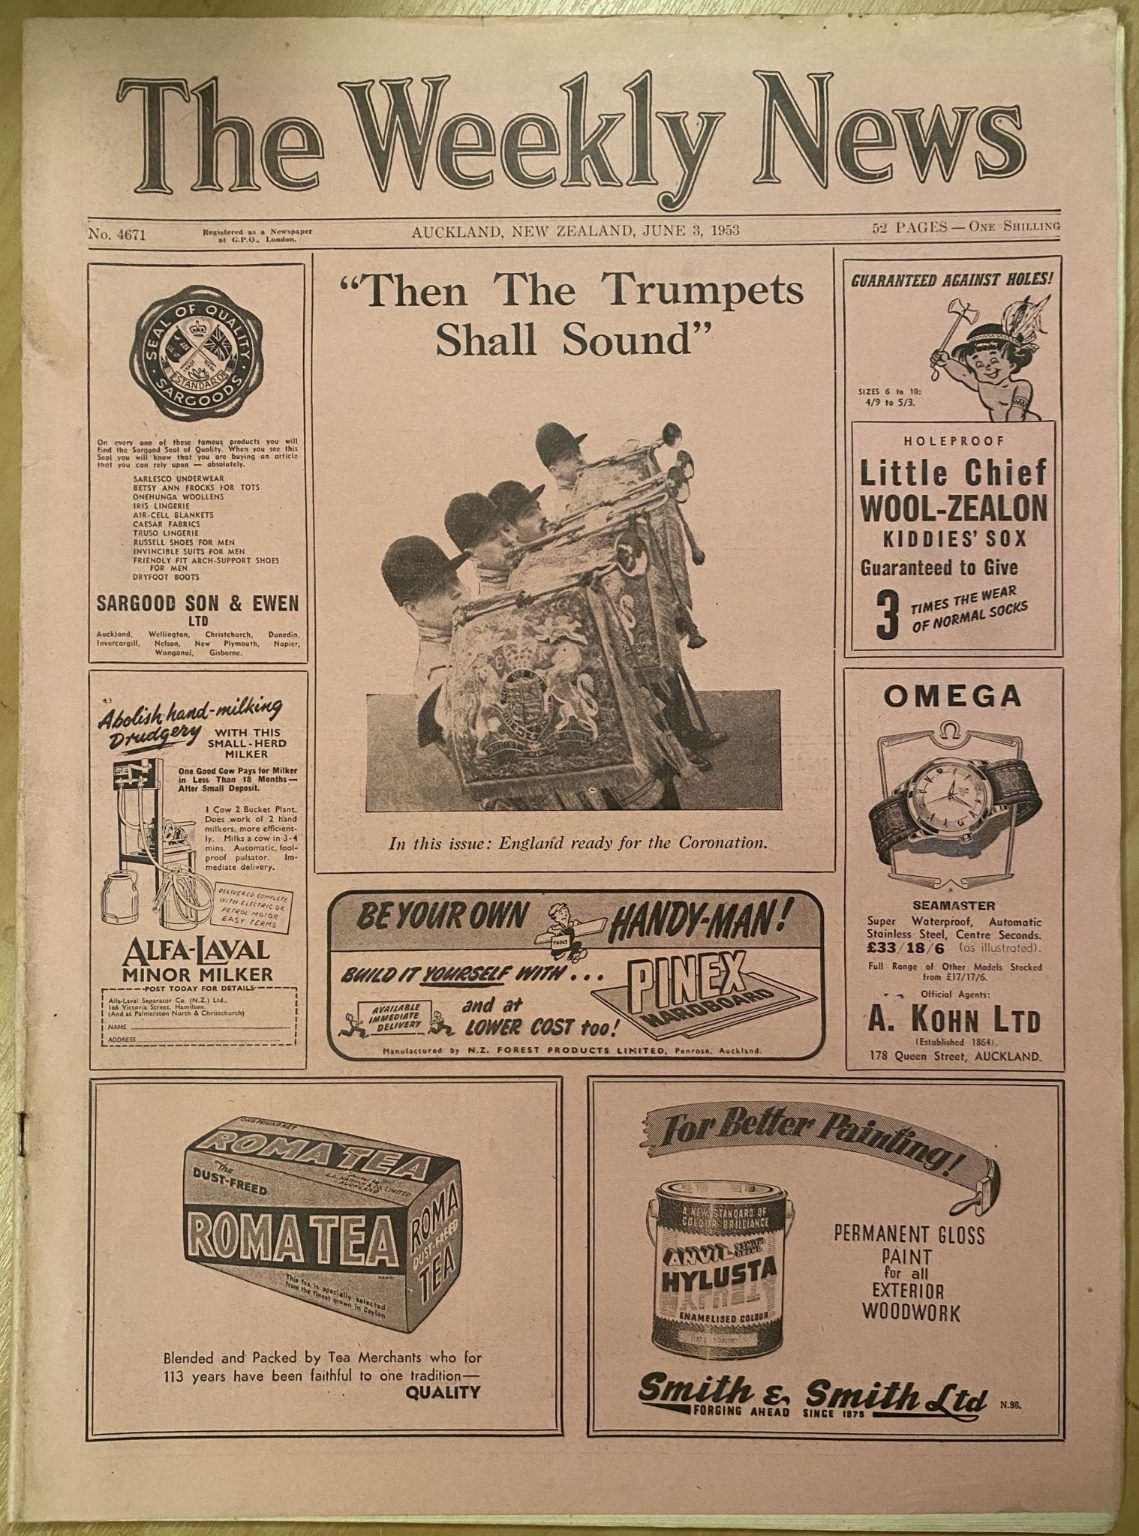 OLD NEWSPAPER: The Weekly News - No. 4671, 3 June 1953